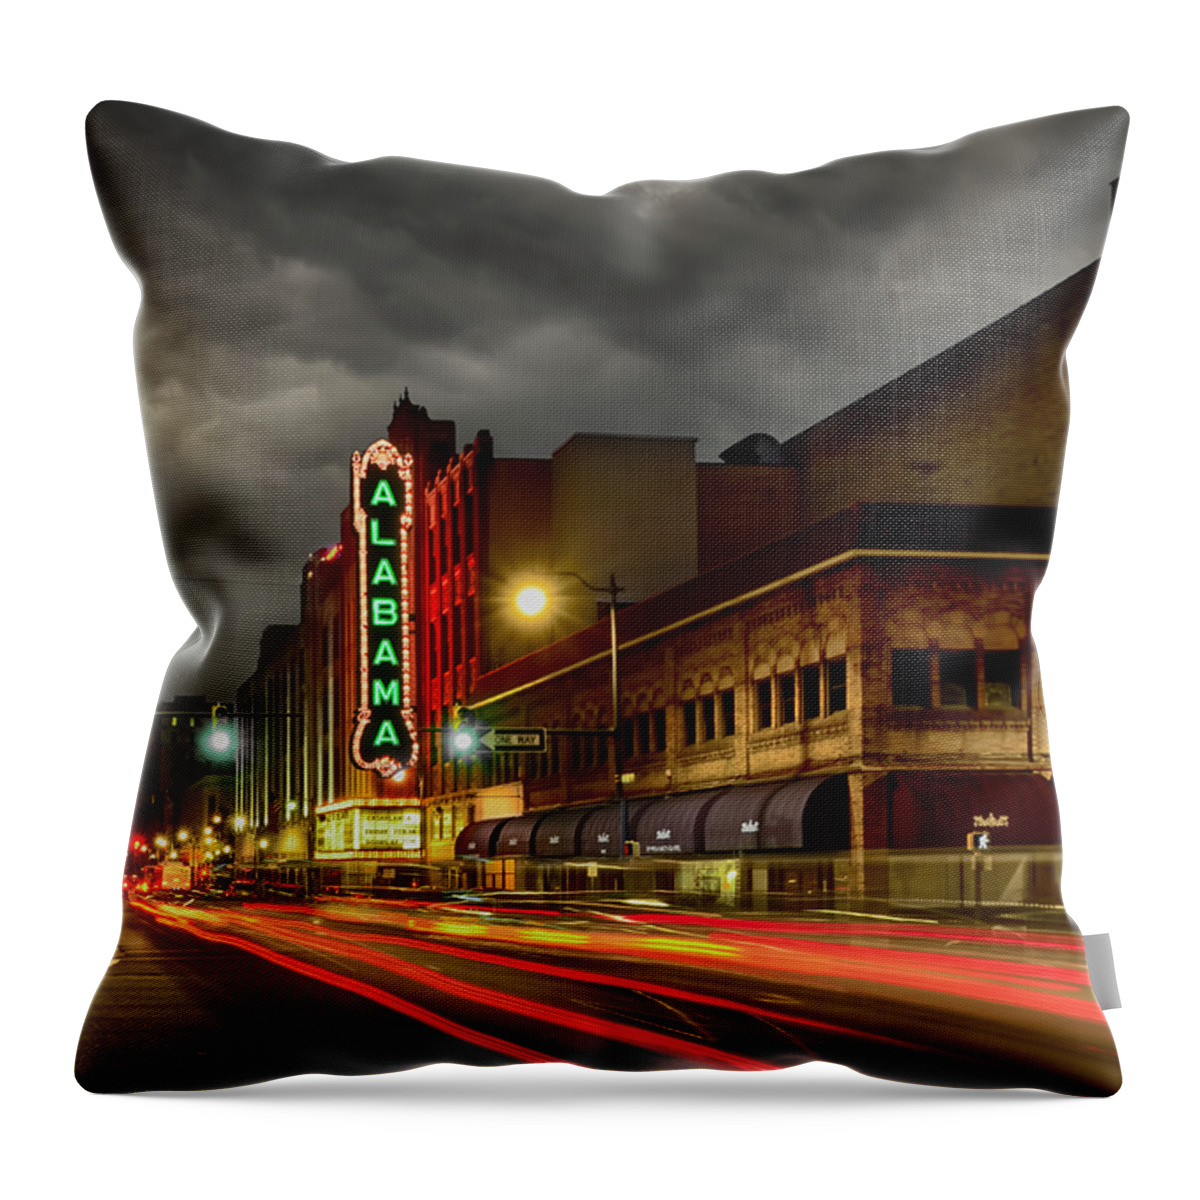 Alabama Theater Throw Pillow featuring the photograph Historic Alabama Theater by Steven Michael